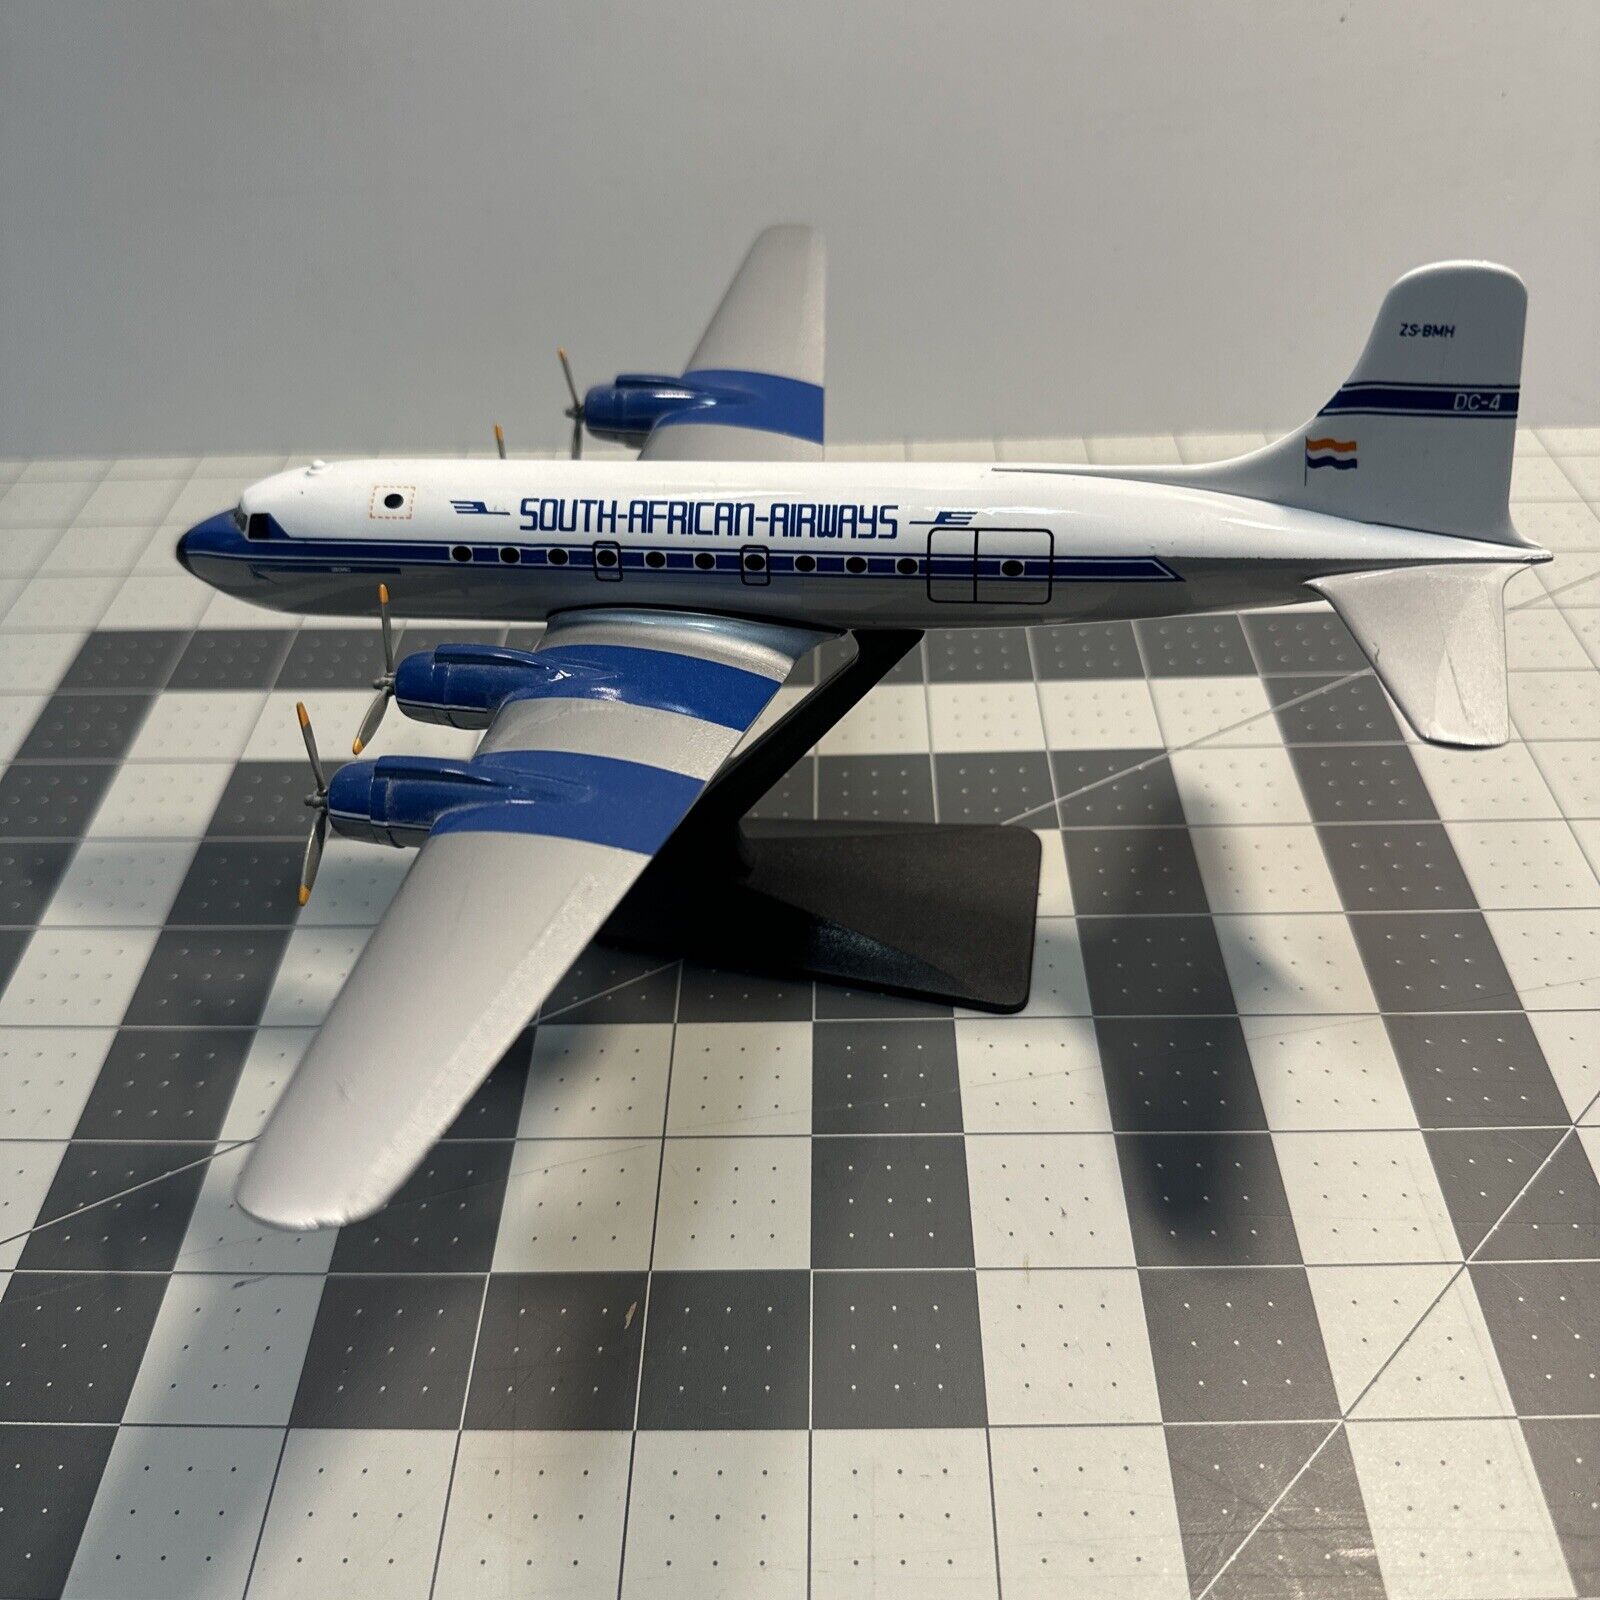 1:400 Scale SOUTH AFRICAN AIRWAYS Douglas DC-4 Model Airplane Display Zs-bmh